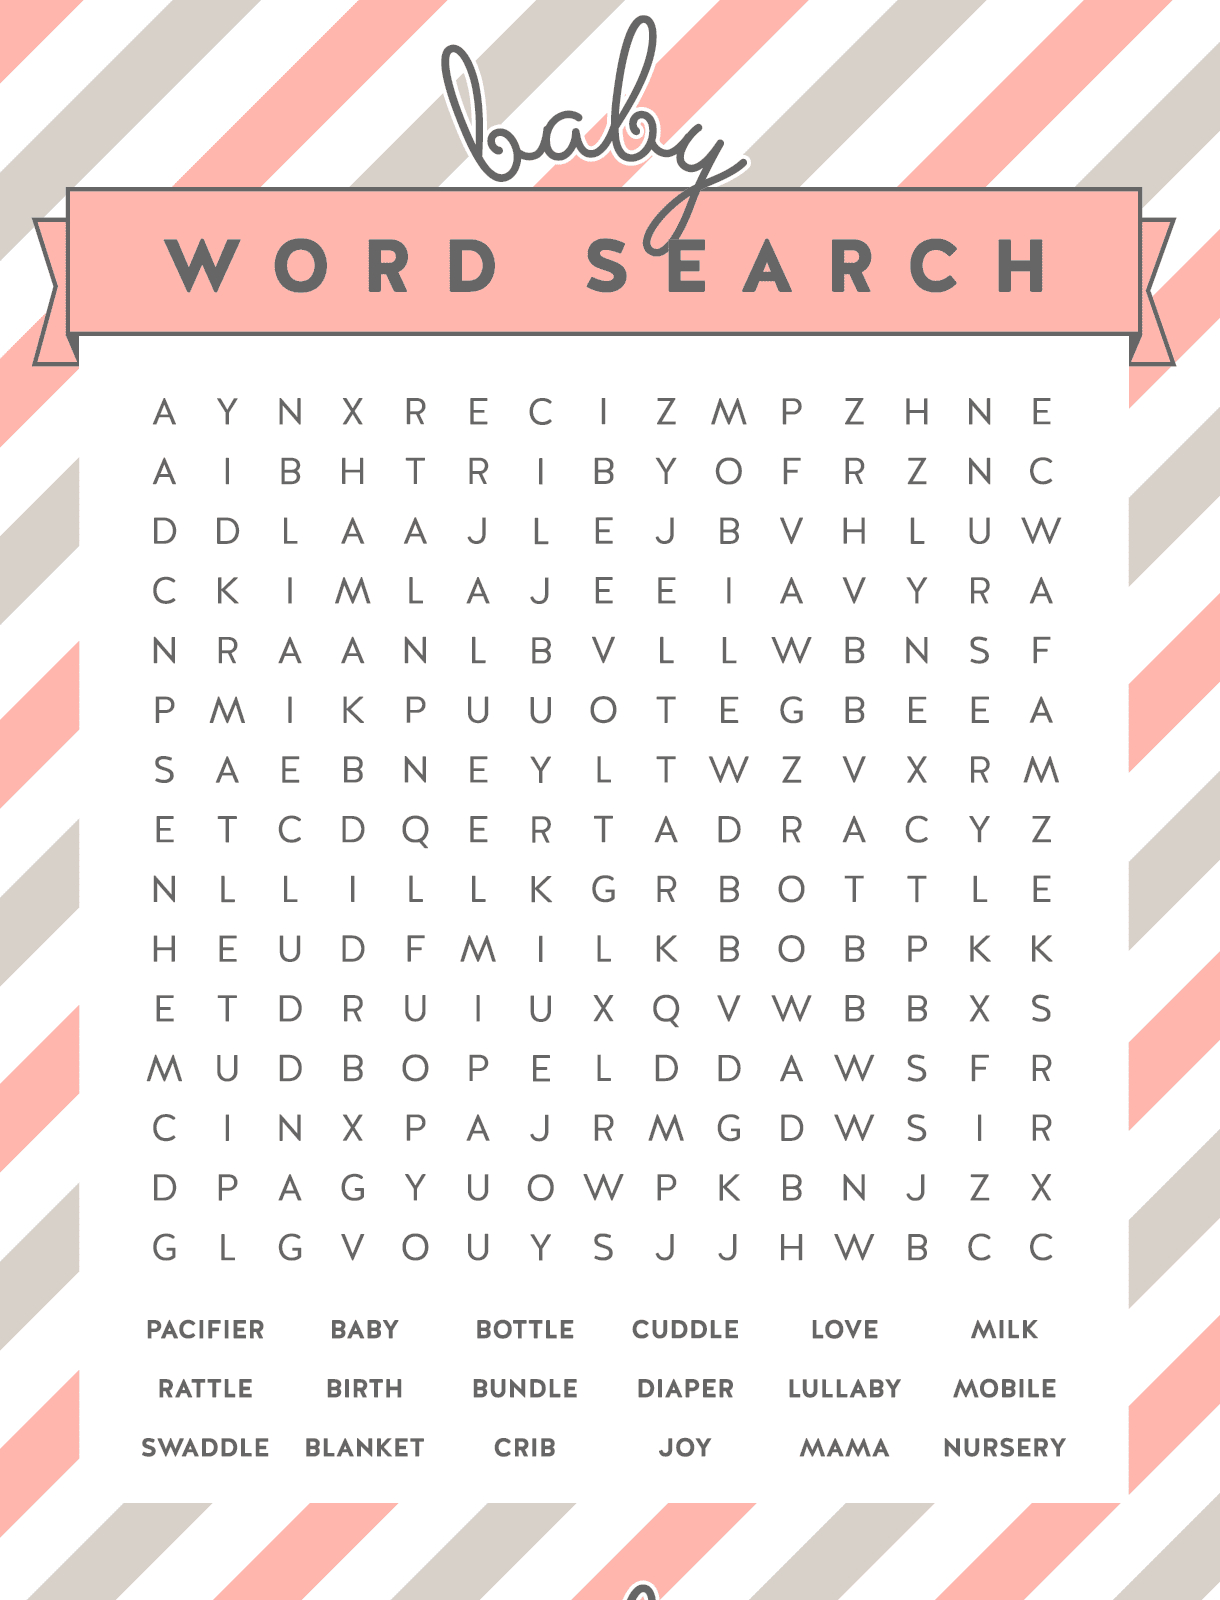 Free Baby Shower Word Search Puzzles - Free Printable Baby Shower Word Search